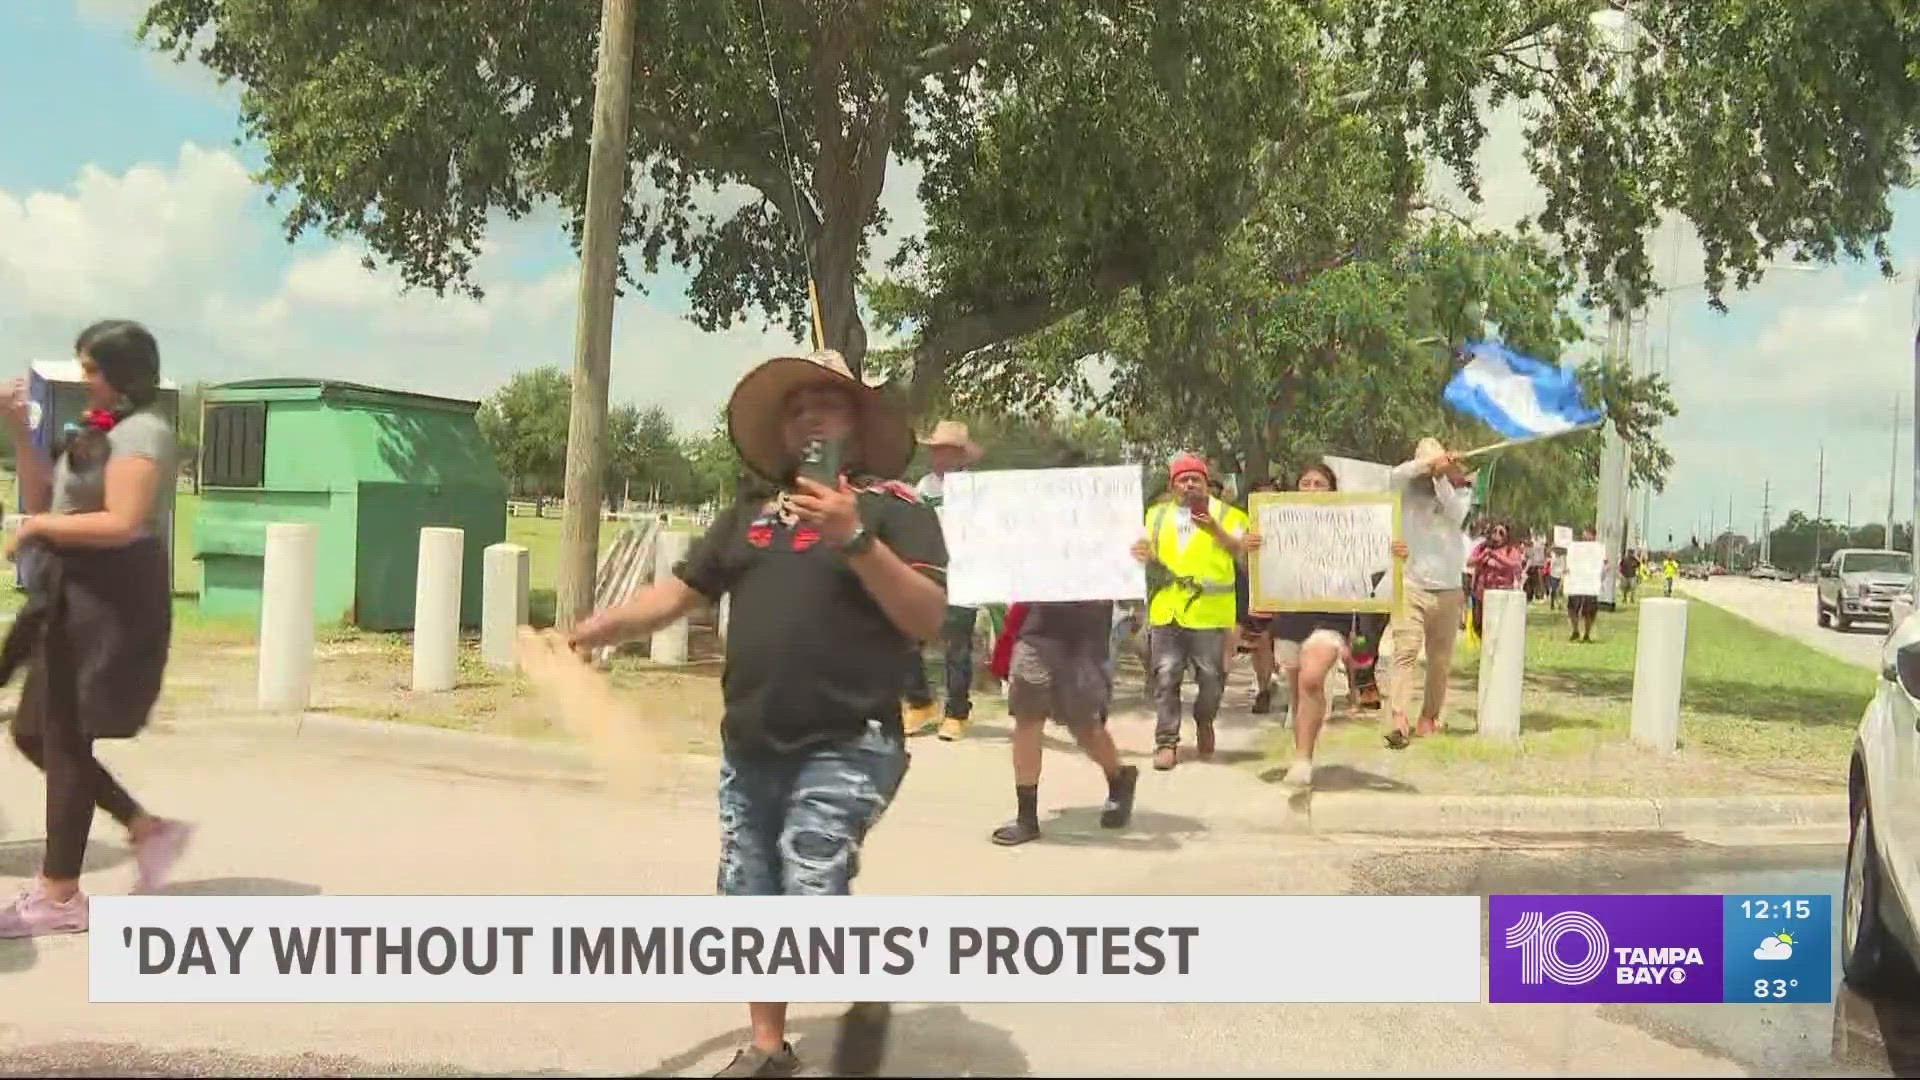 The demonstrations are in response to new Florida immigration laws.